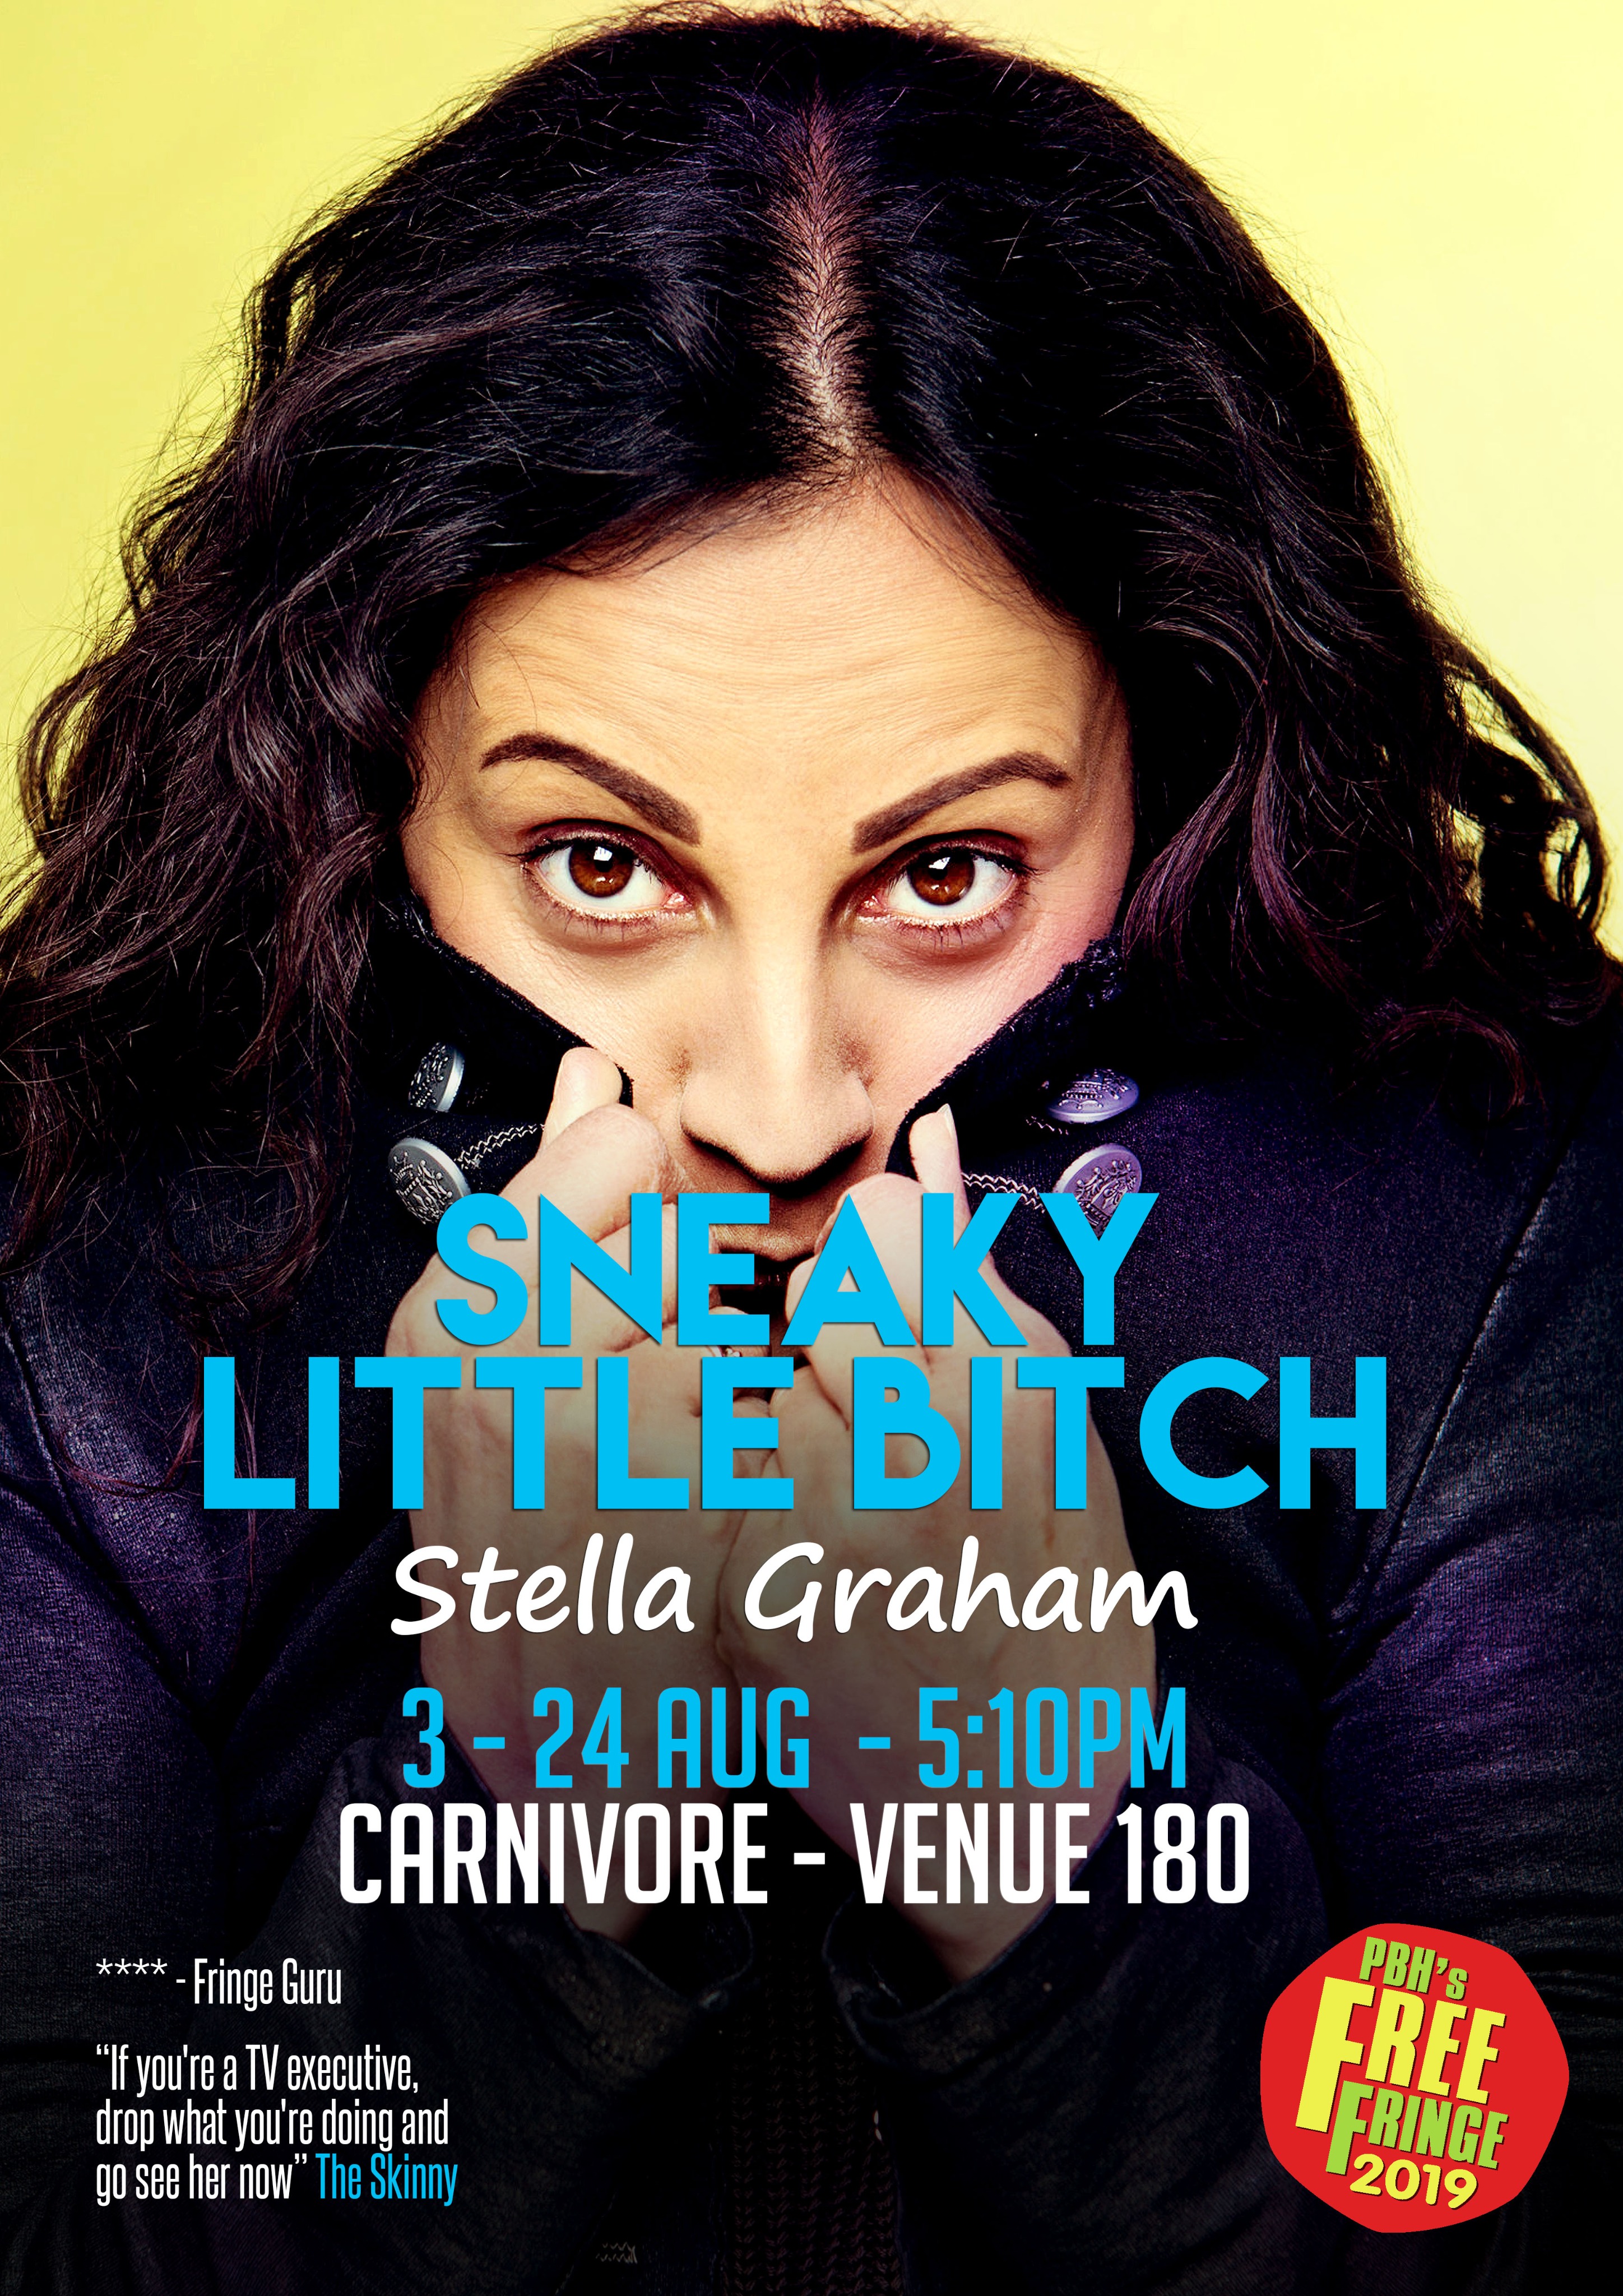 The poster for Stella Graham: Sneaky Little Bitch